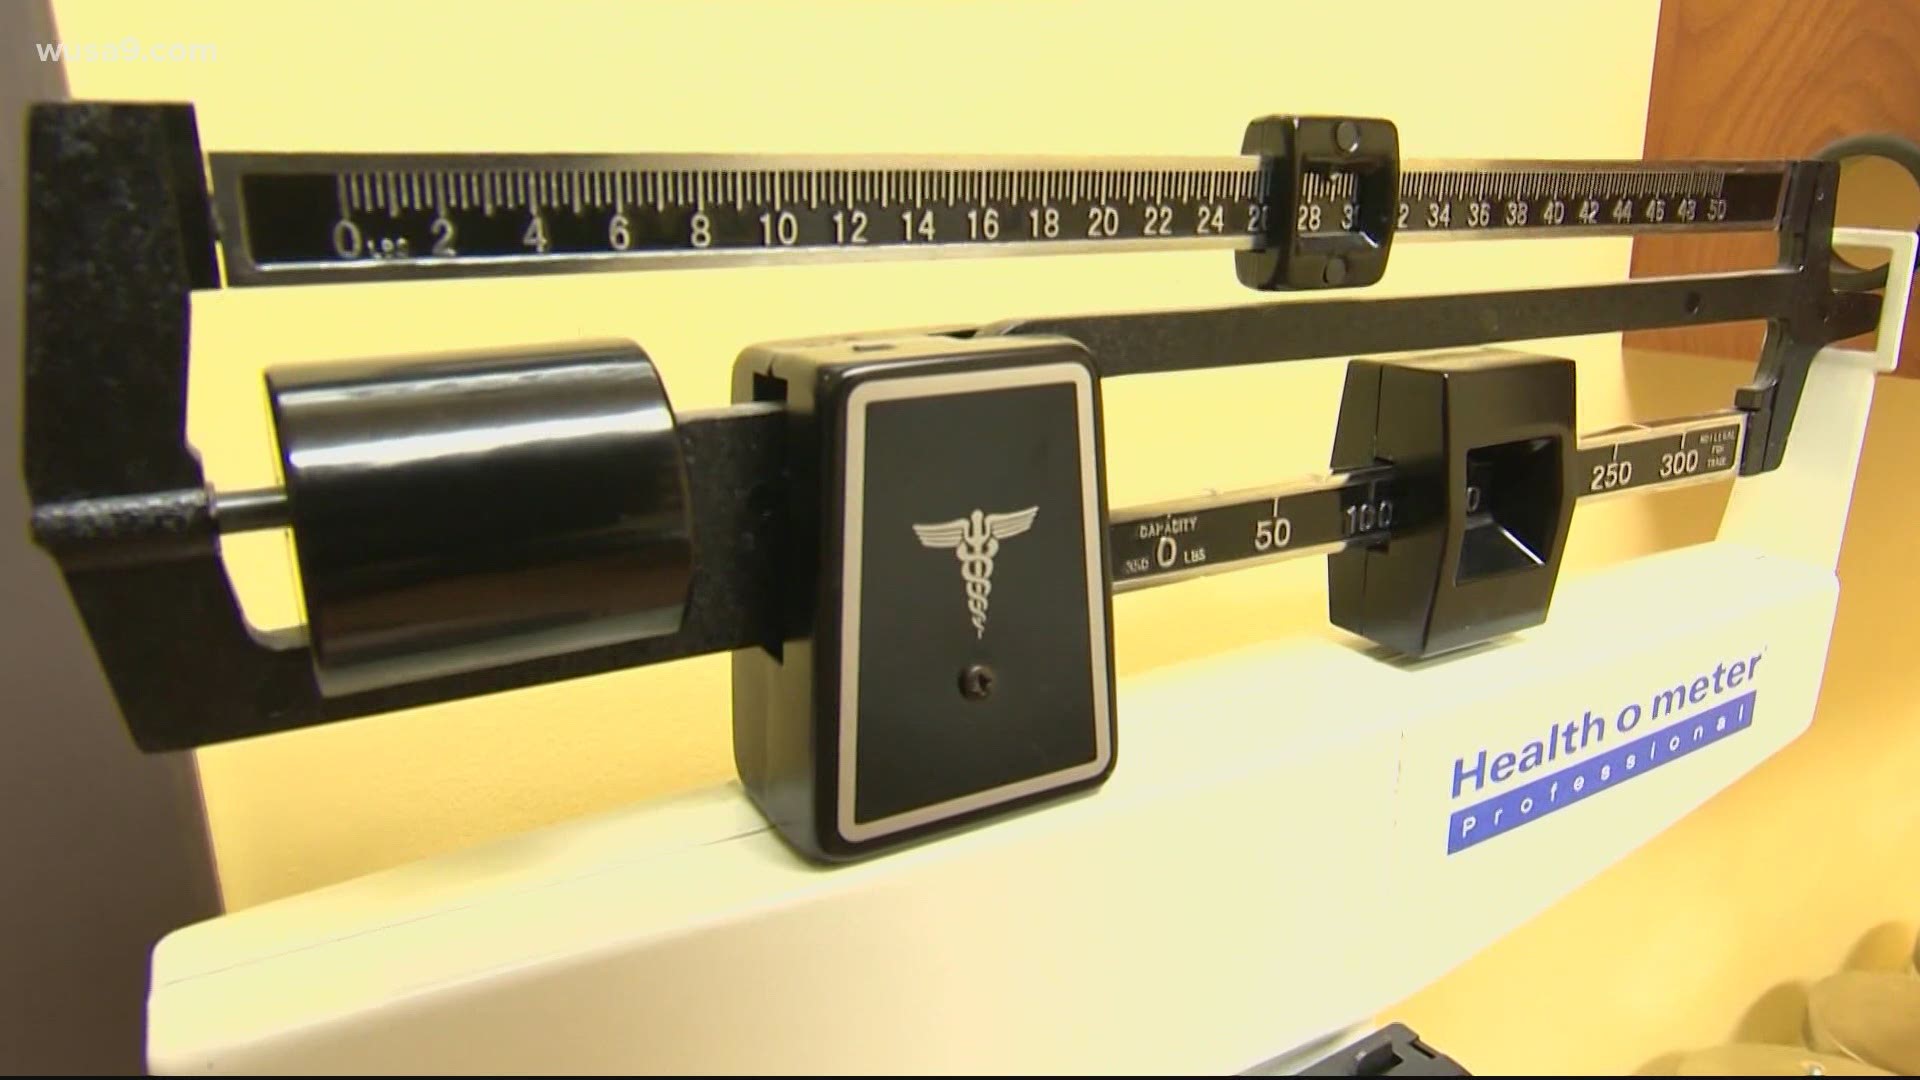 A northwest Ohio nurse practitioner said feelings of anxiety, depression and isolation are components of eating disorders.